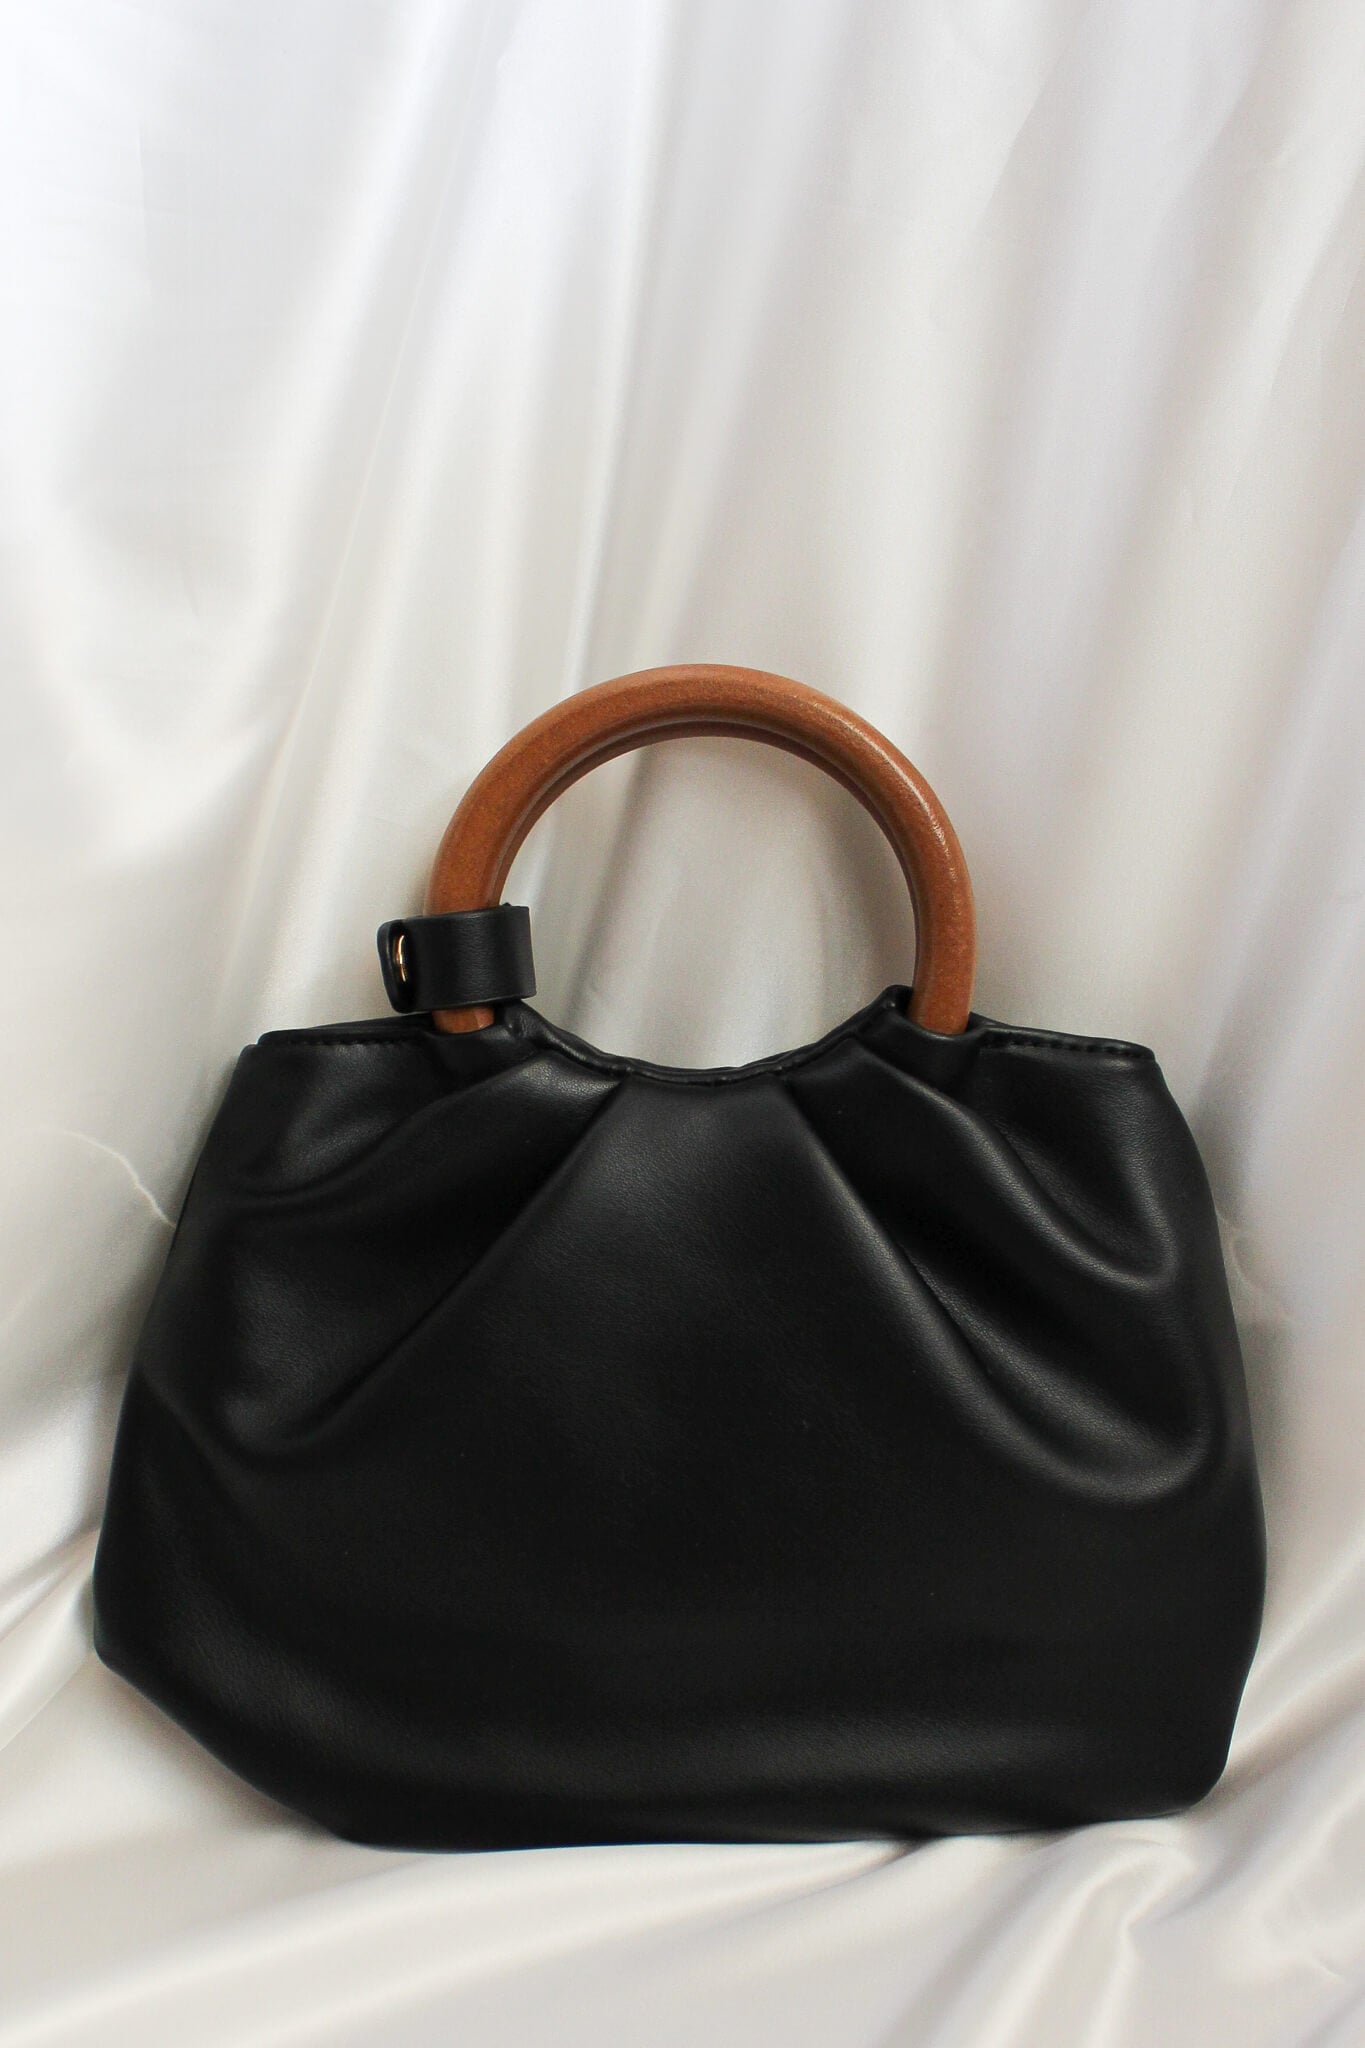 Smooth PU leather bag with wooden handles